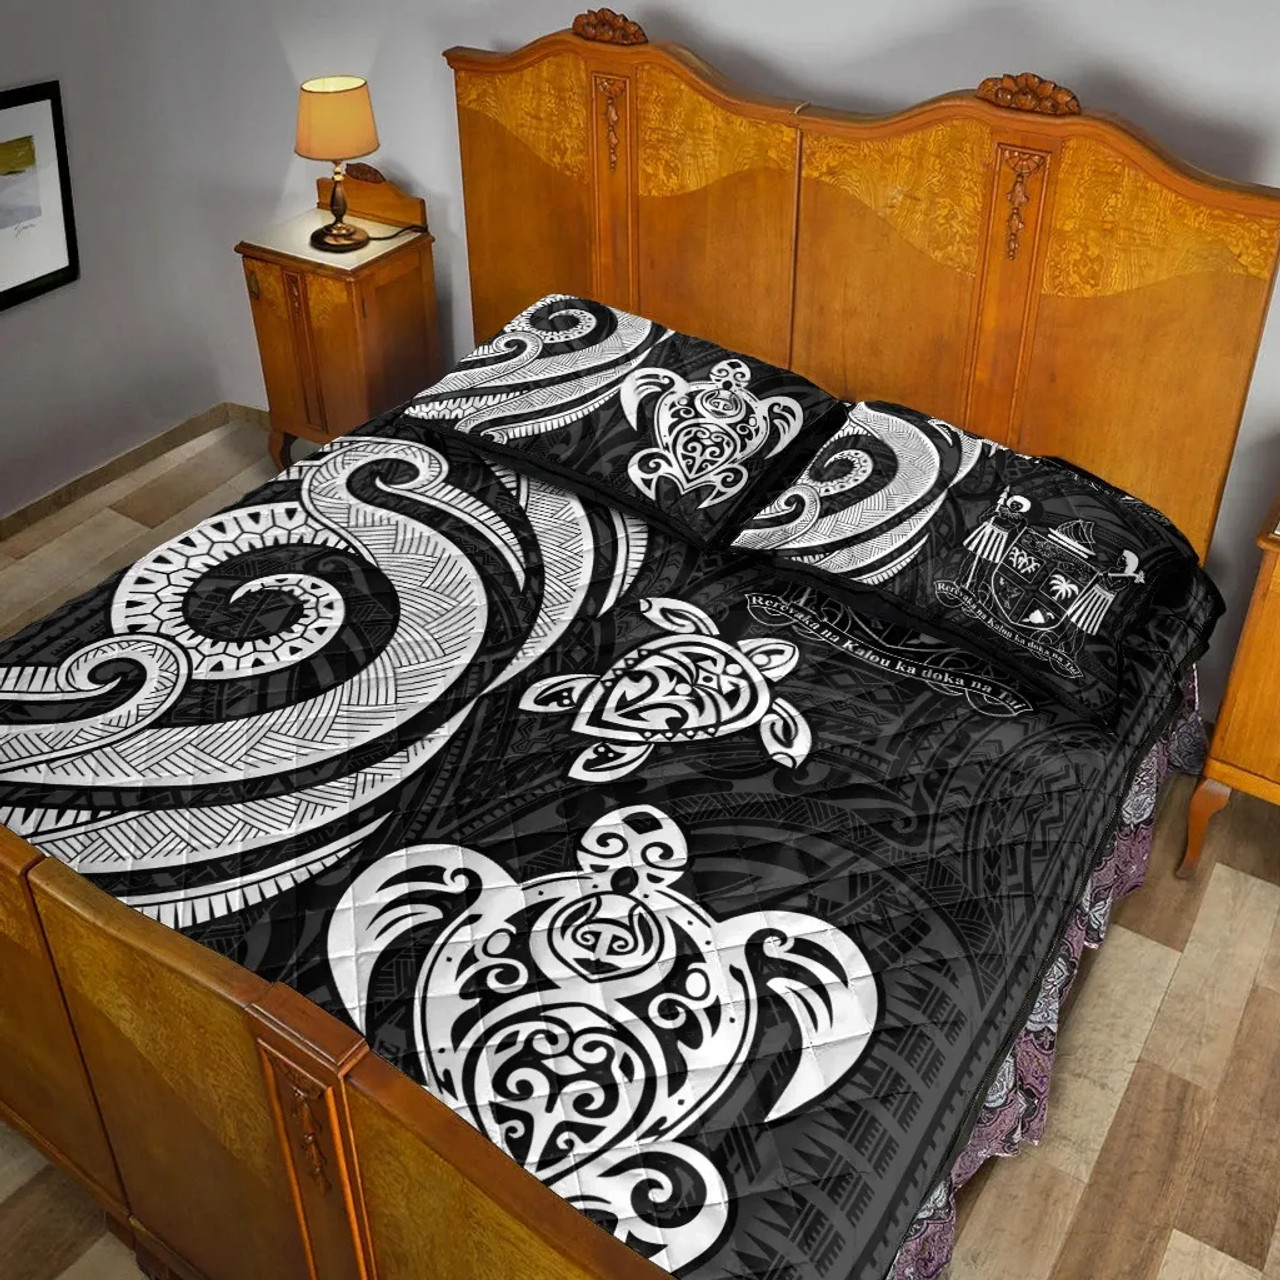 Fiji Quilt Bed Set - White Tentacle Turtle Crest 4